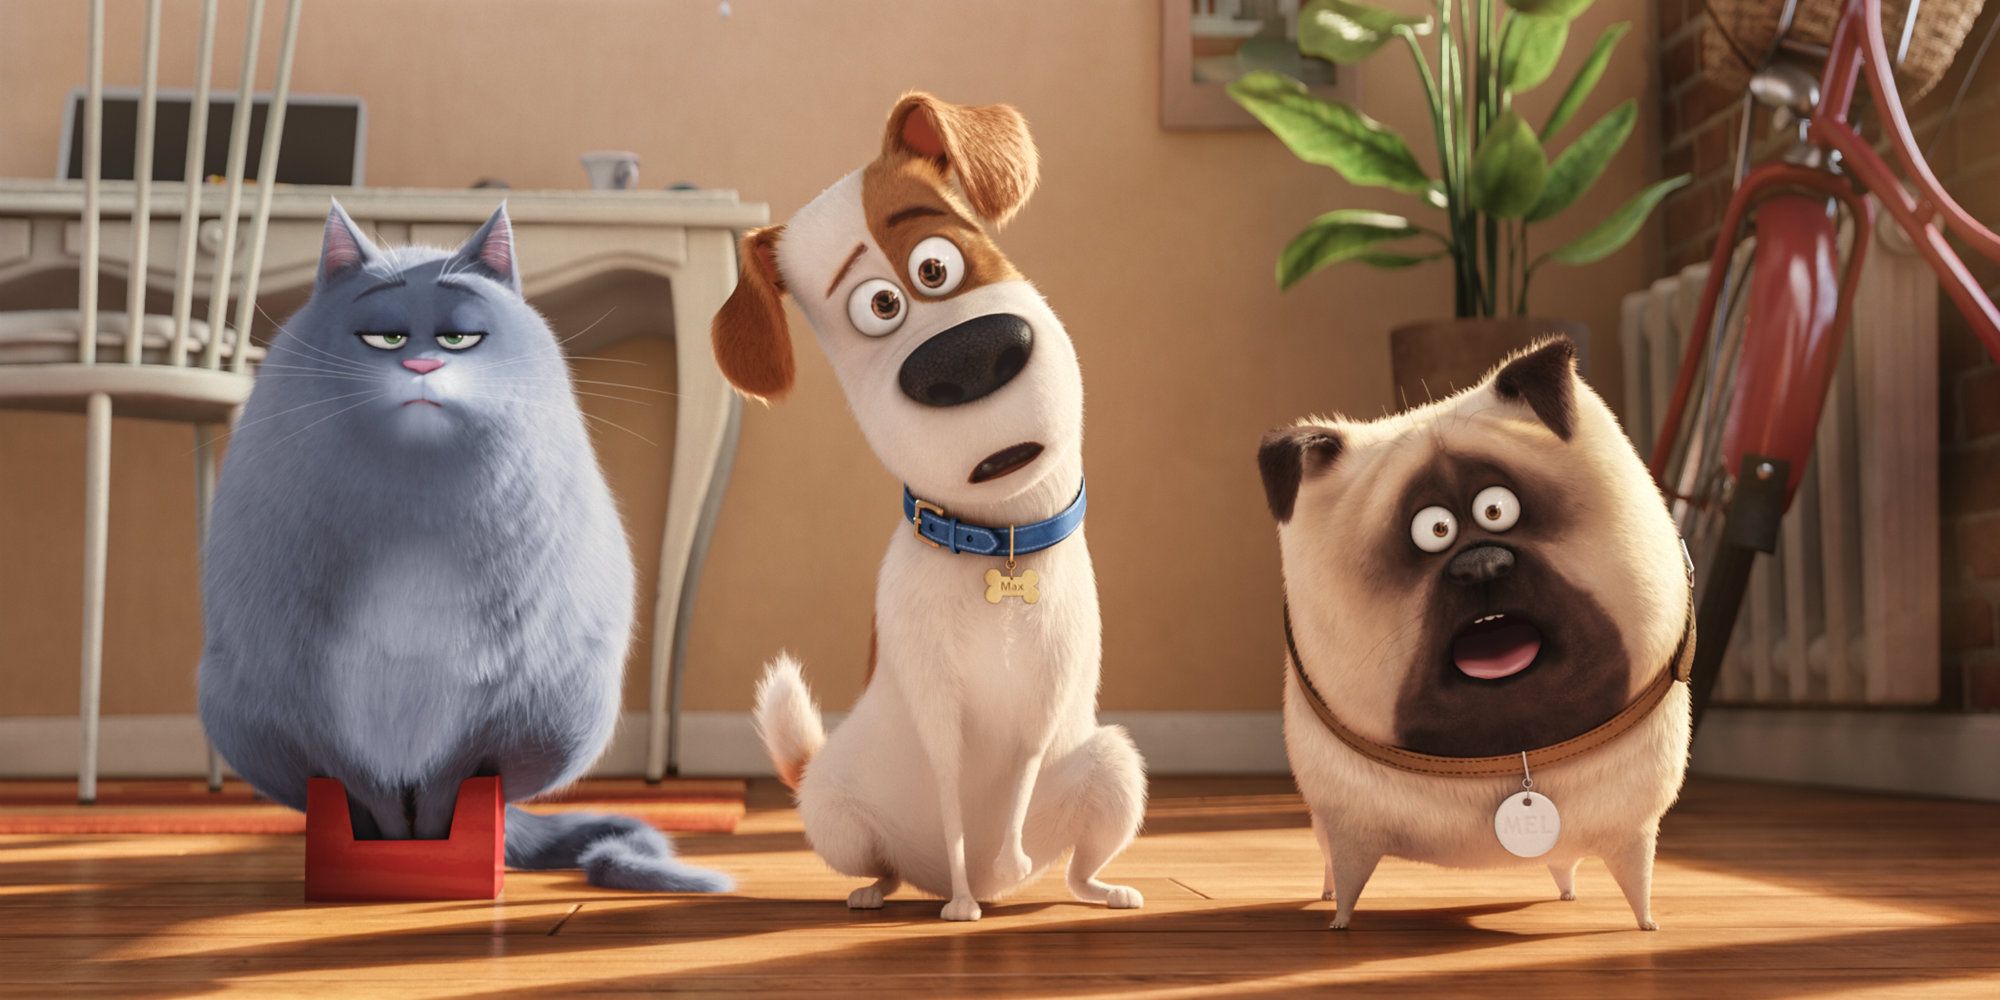 Chloe, Max, and Mel staring awkwardly in a scene from The Secret Life of Pets